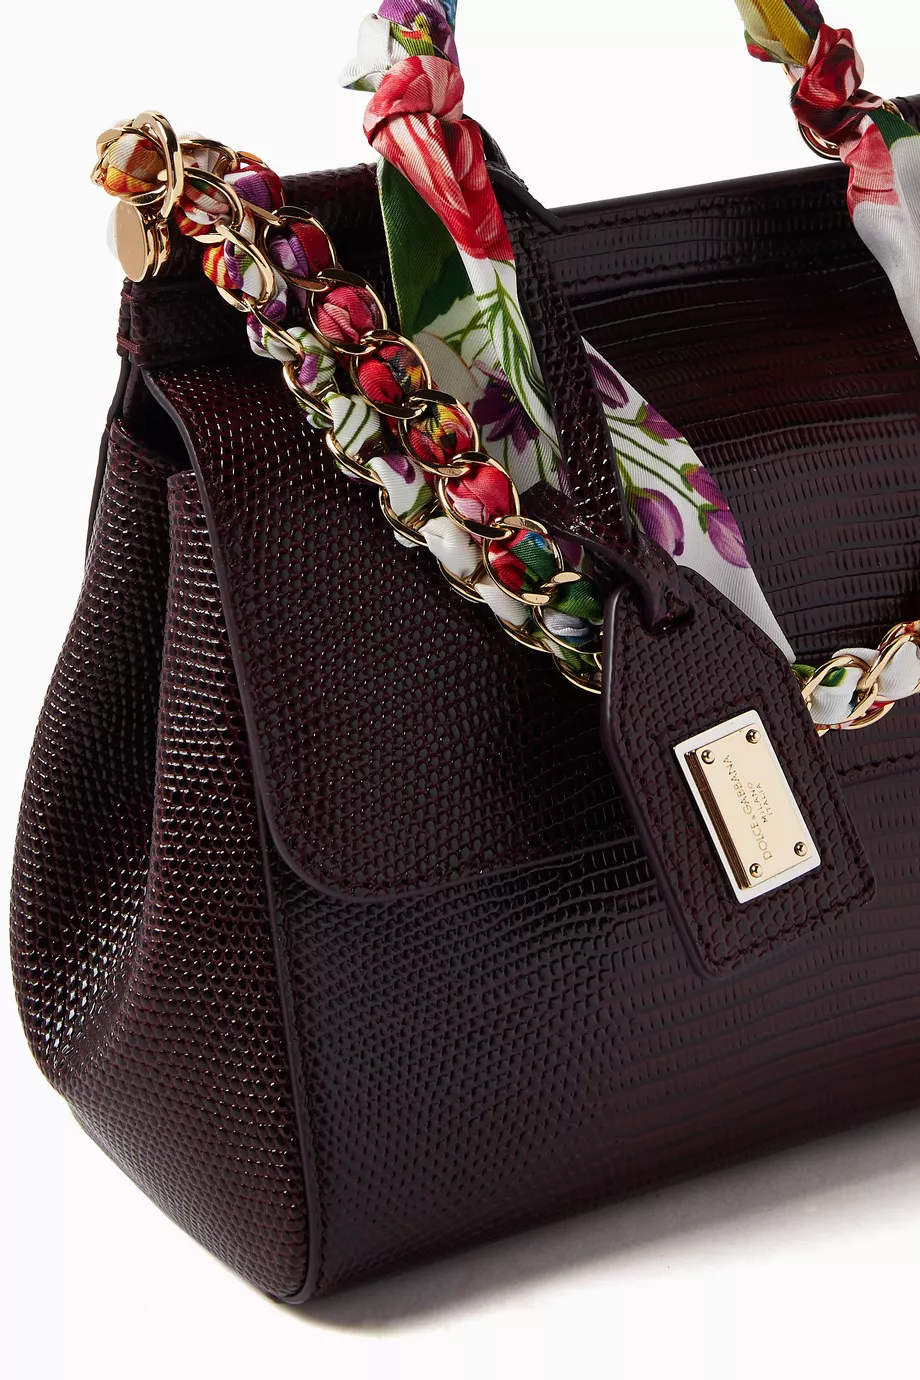 OUNASS - The Dolce Gabbana floral printed Miss Sicily Bag